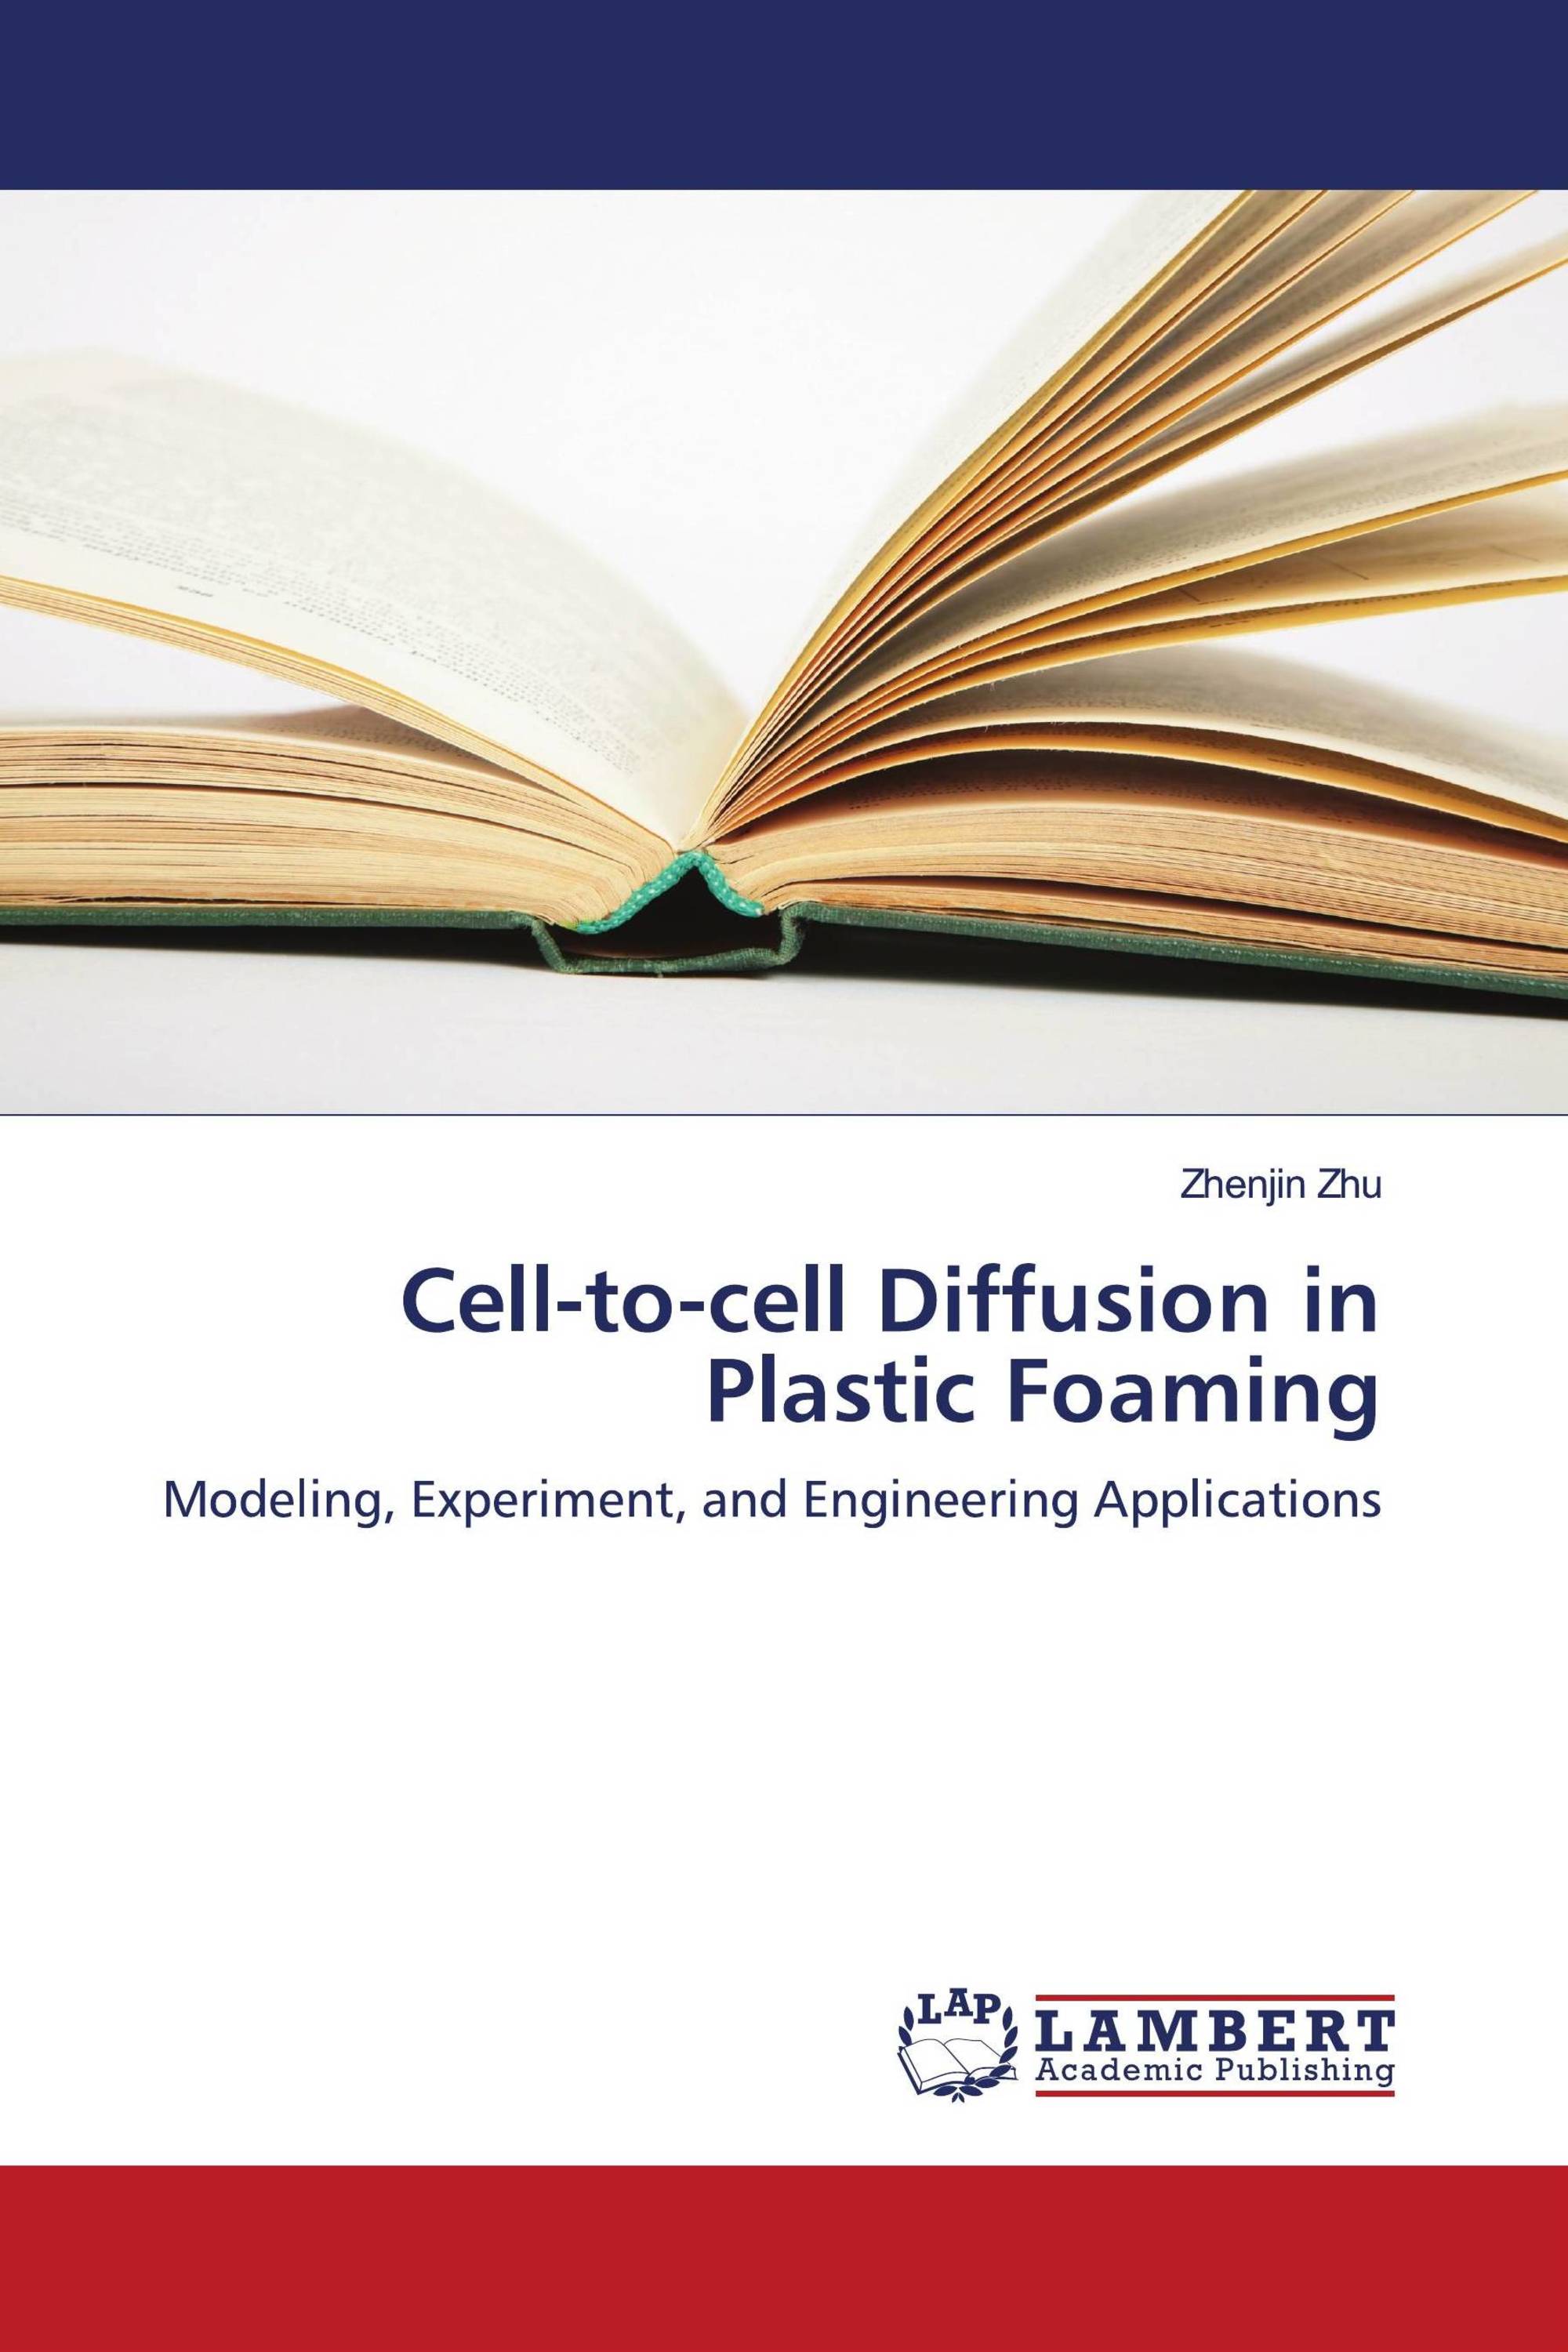 Cell-to-cell Diffusion in Plastic Foaming